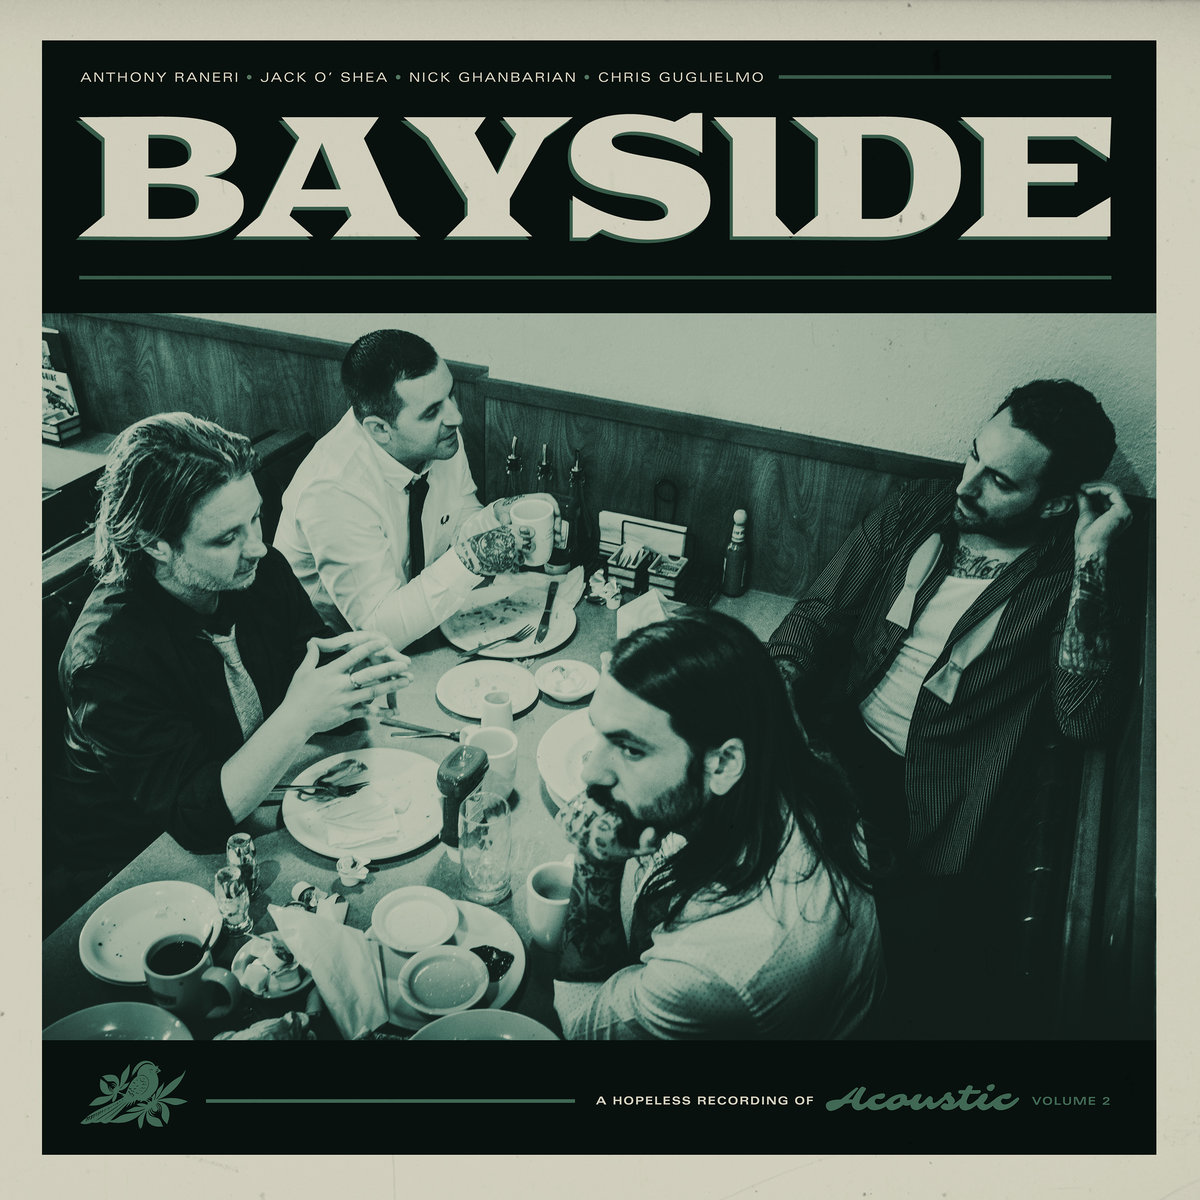 Bayside’s Acoustic Volume 2